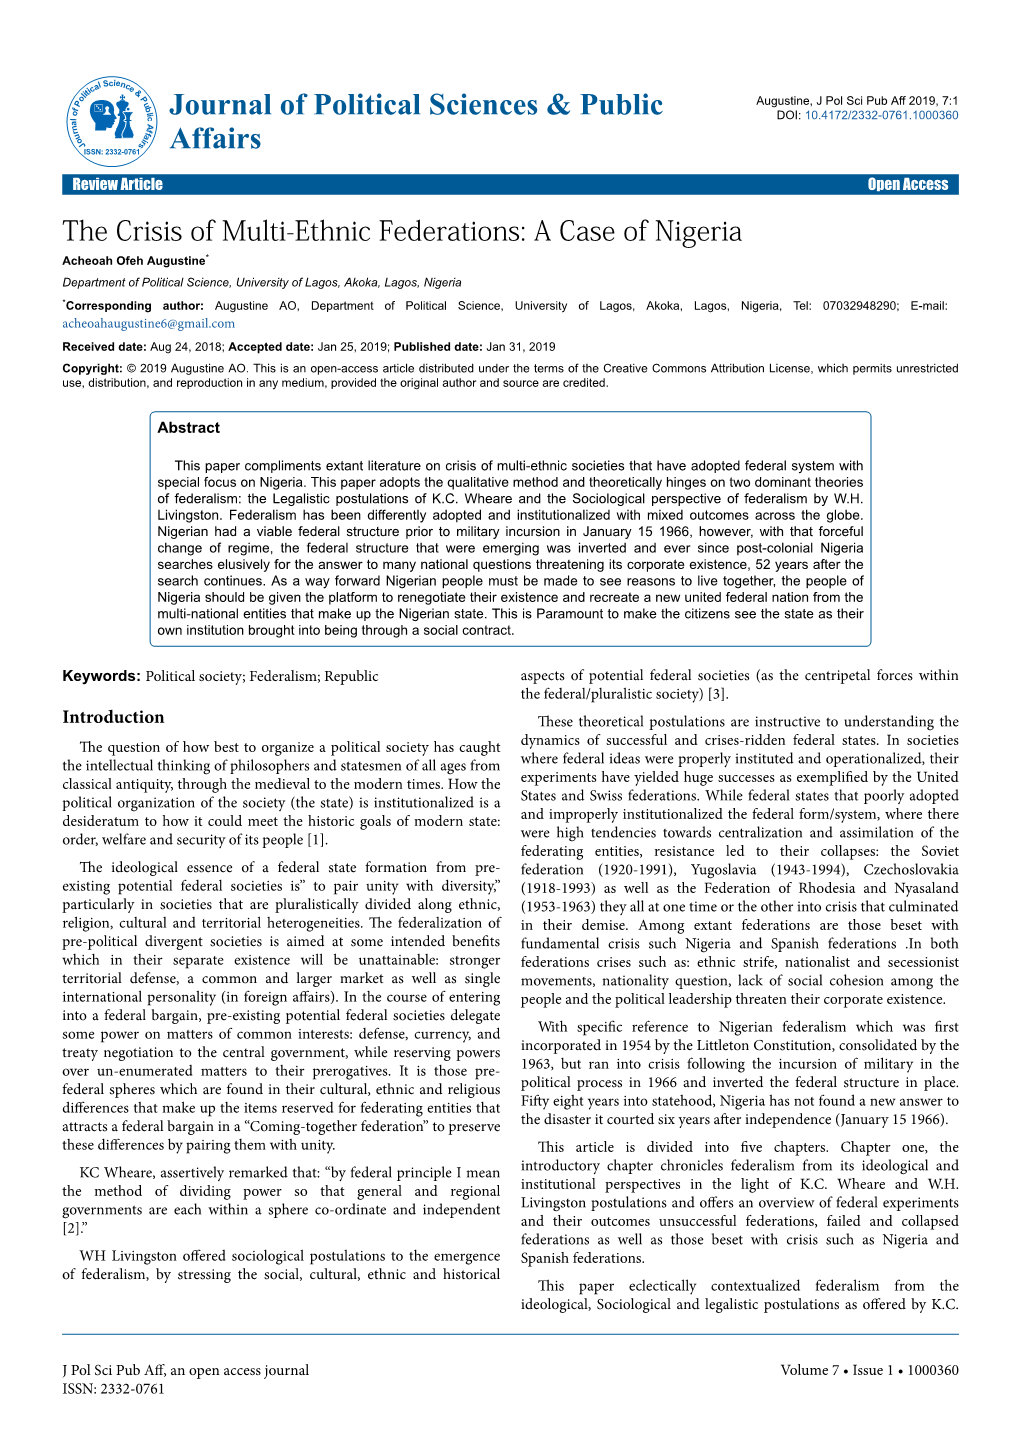 The Crisis of Multi-Ethnic Federations: a Case of Nigeria